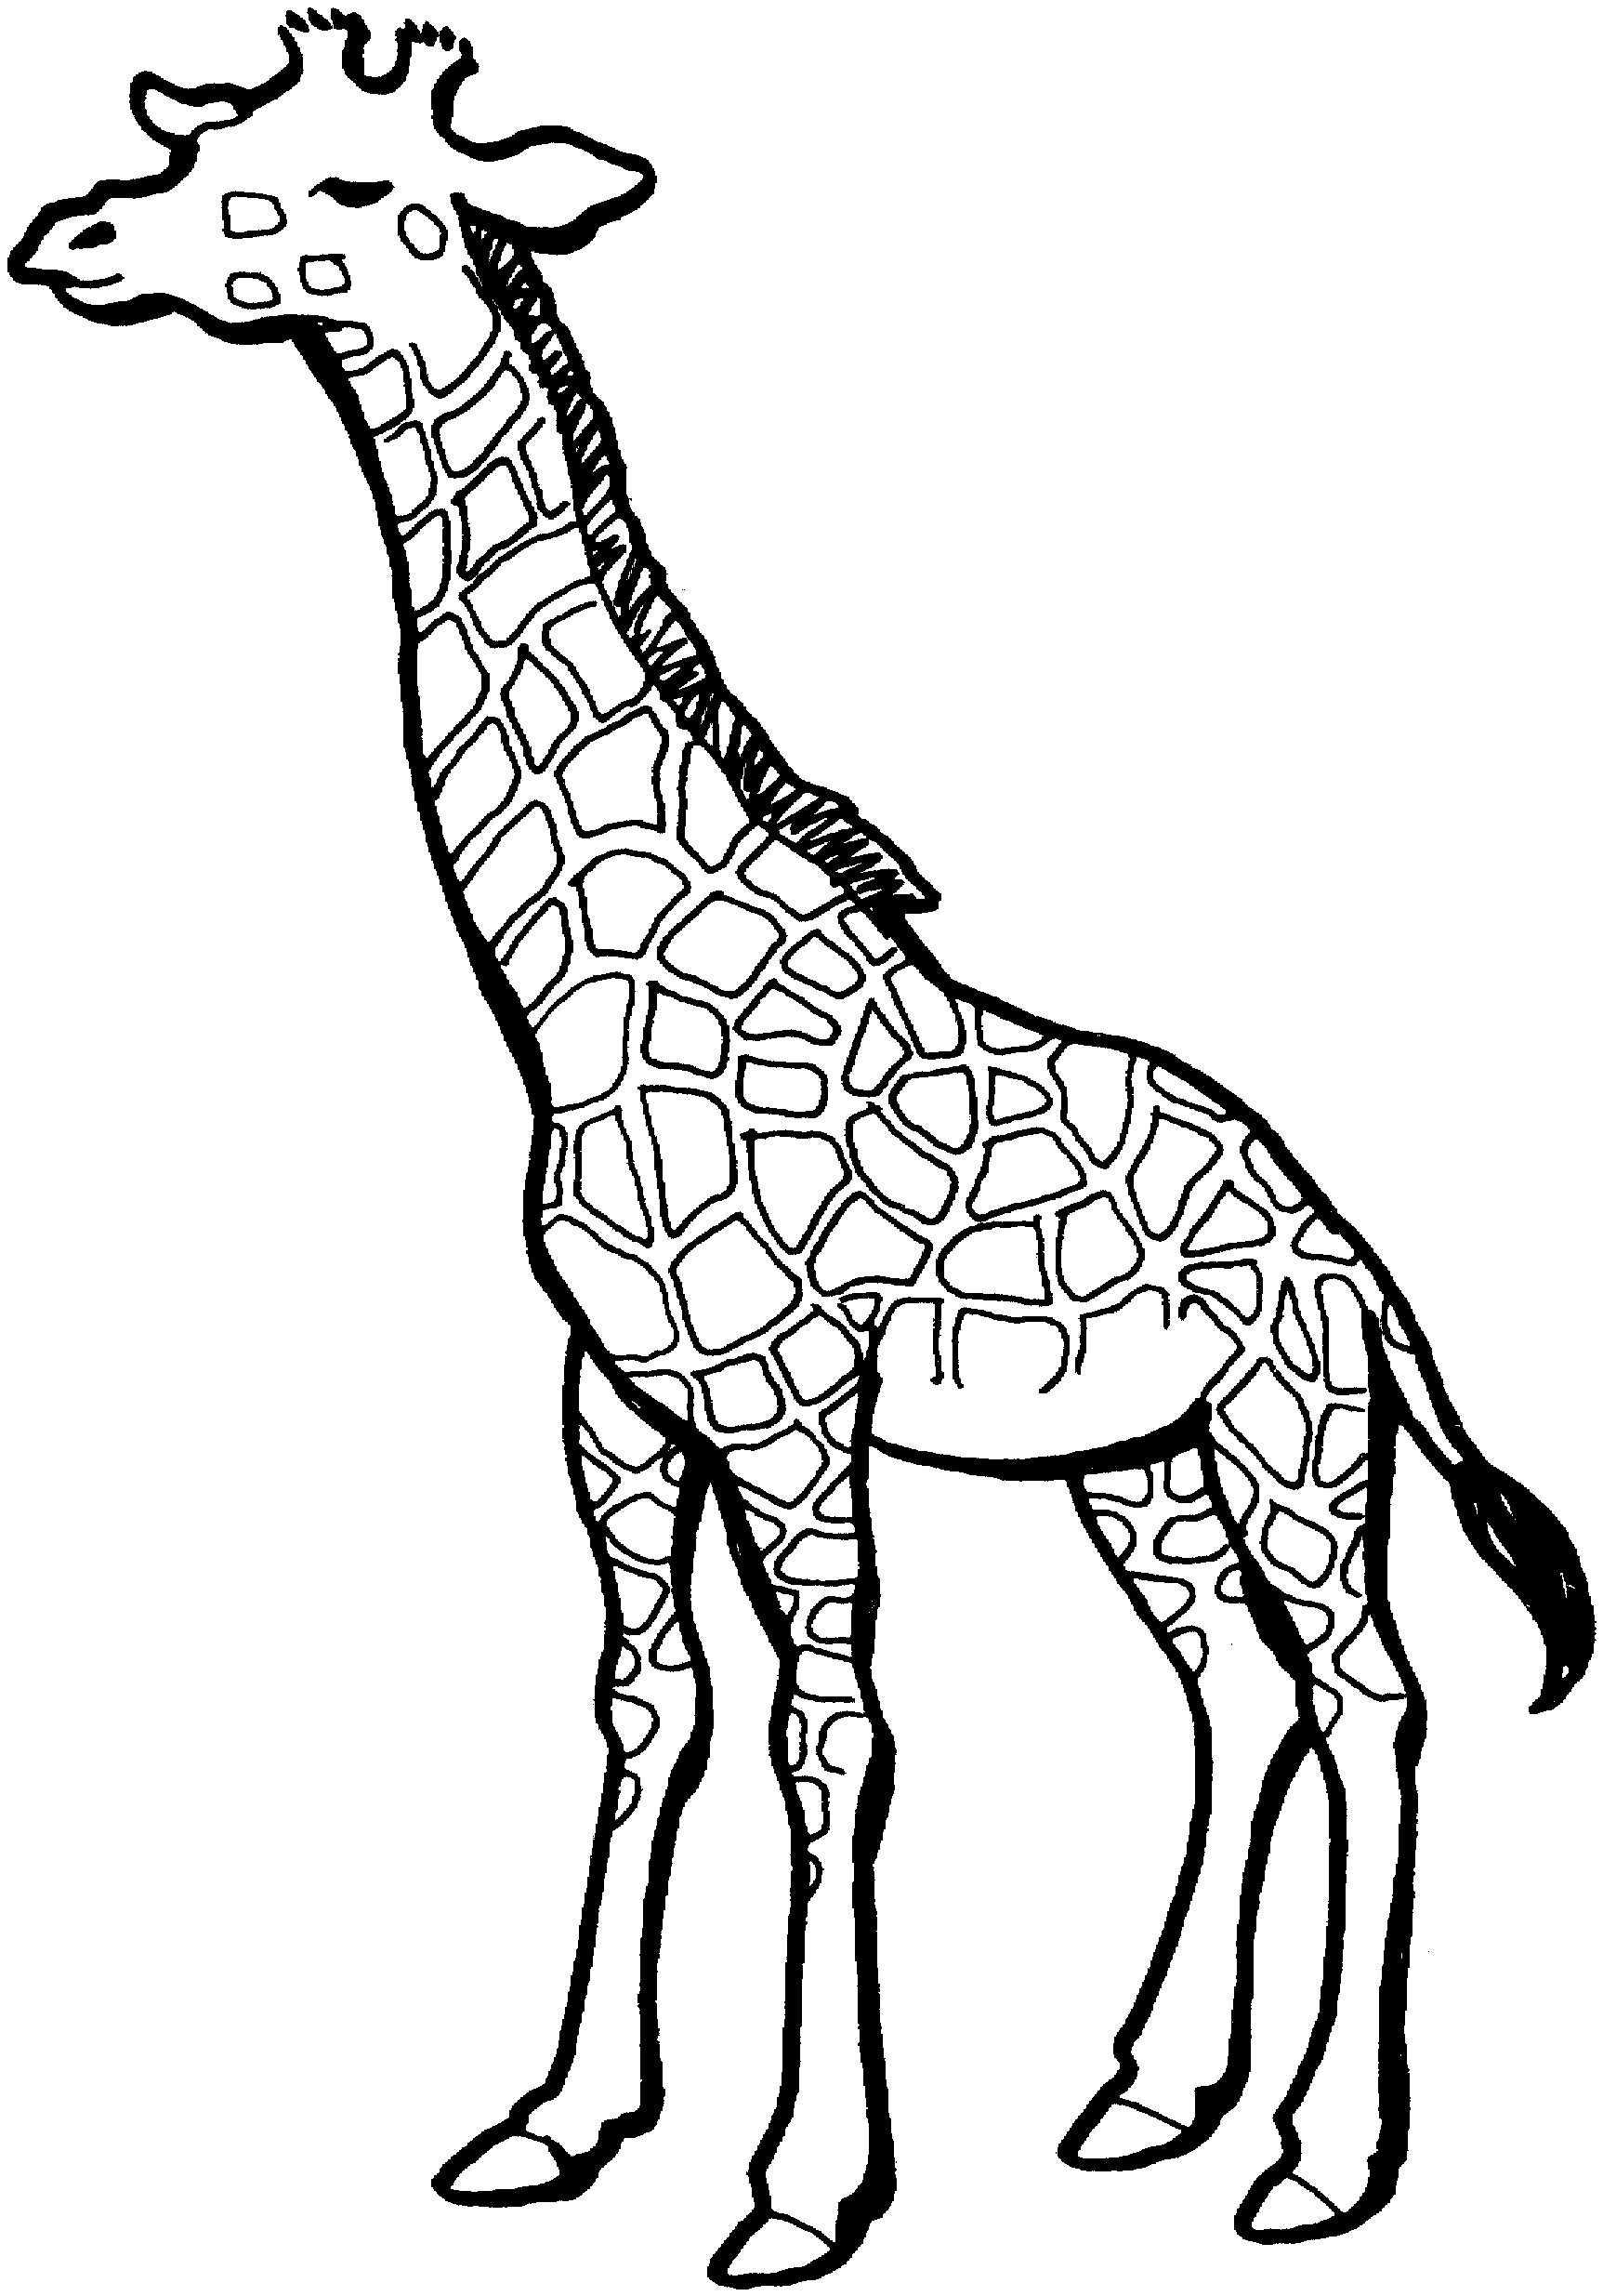 Giraffe Head Coloring Pages | Clipart Panda - Free Clipart Images